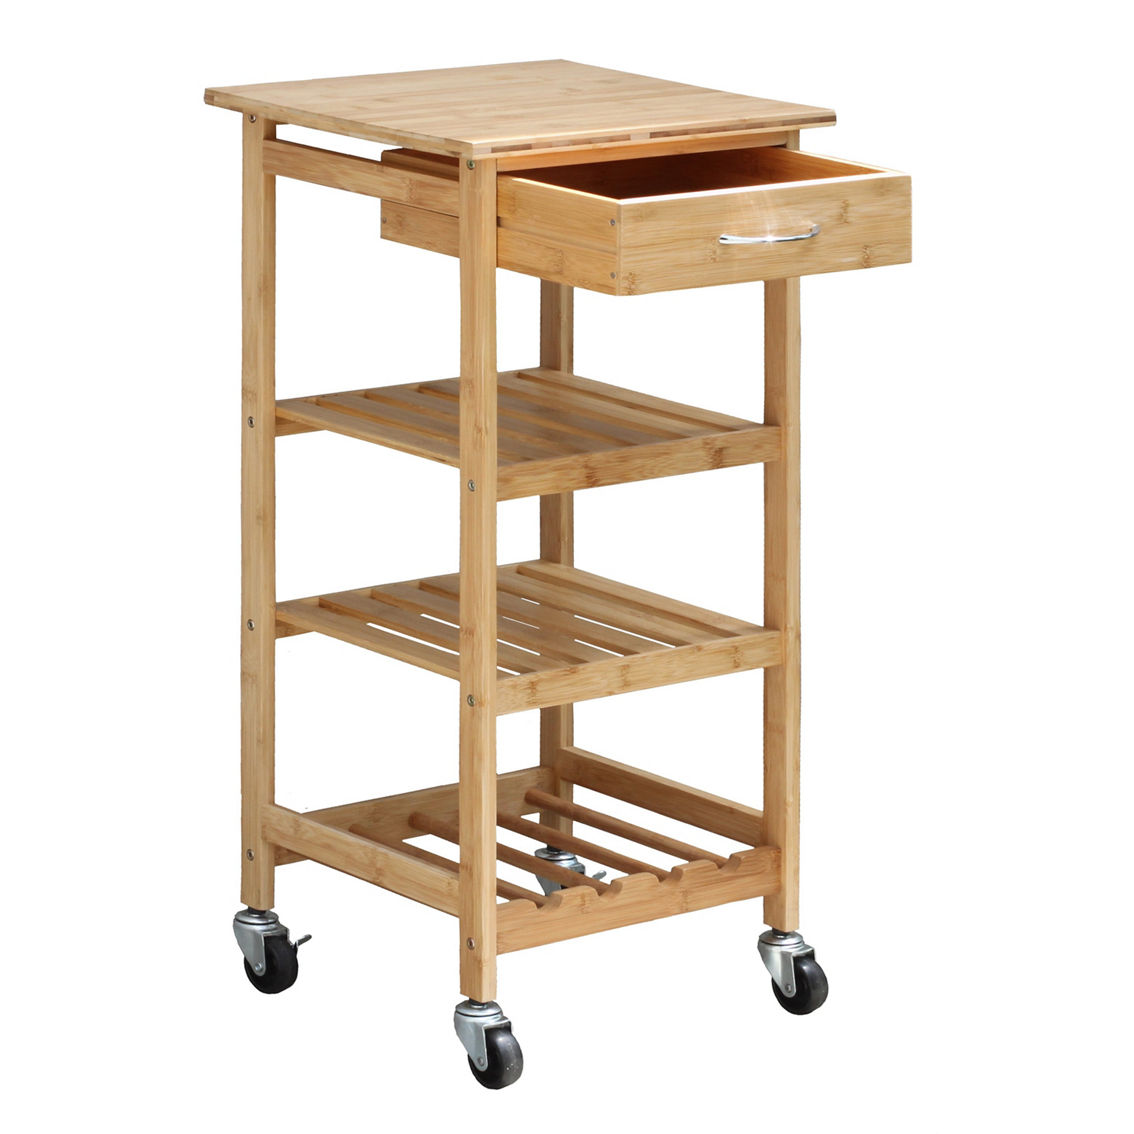 Oceanstar Bamboo Kitchen Trolley - Image 2 of 5